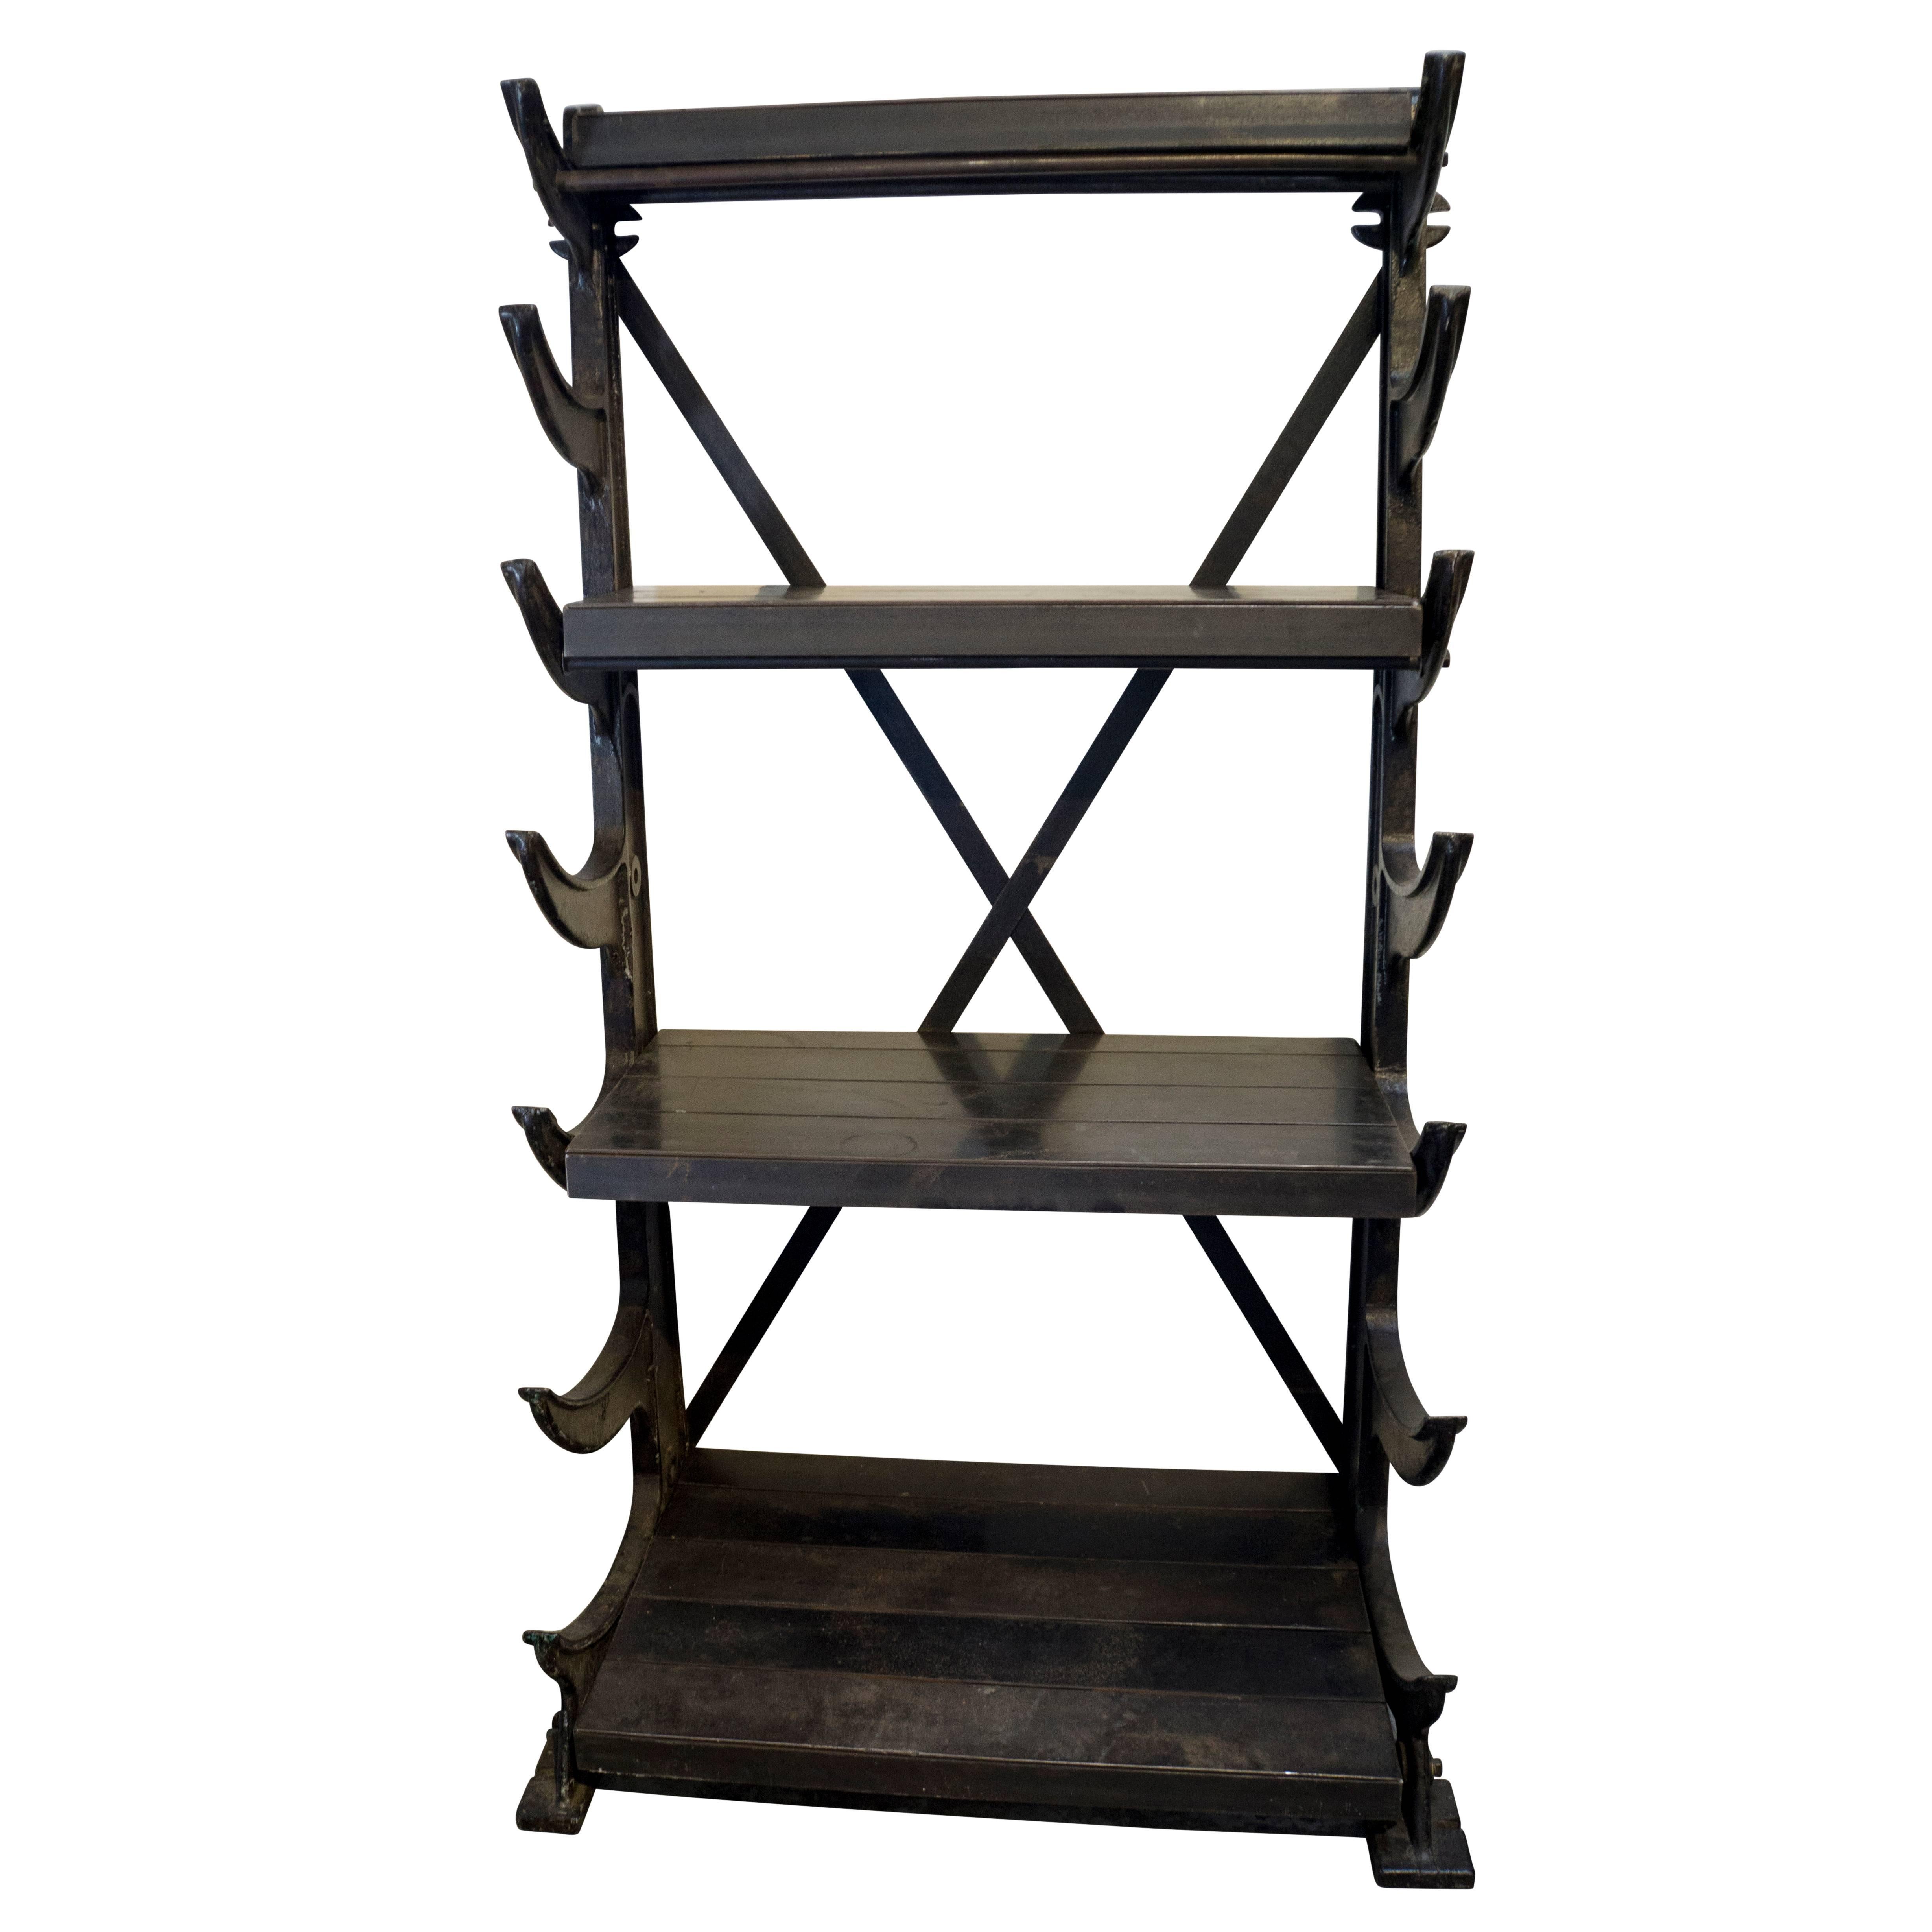 Early 20th Century Industrial Pipe Rack Converted to Shelving, circa 1900, American